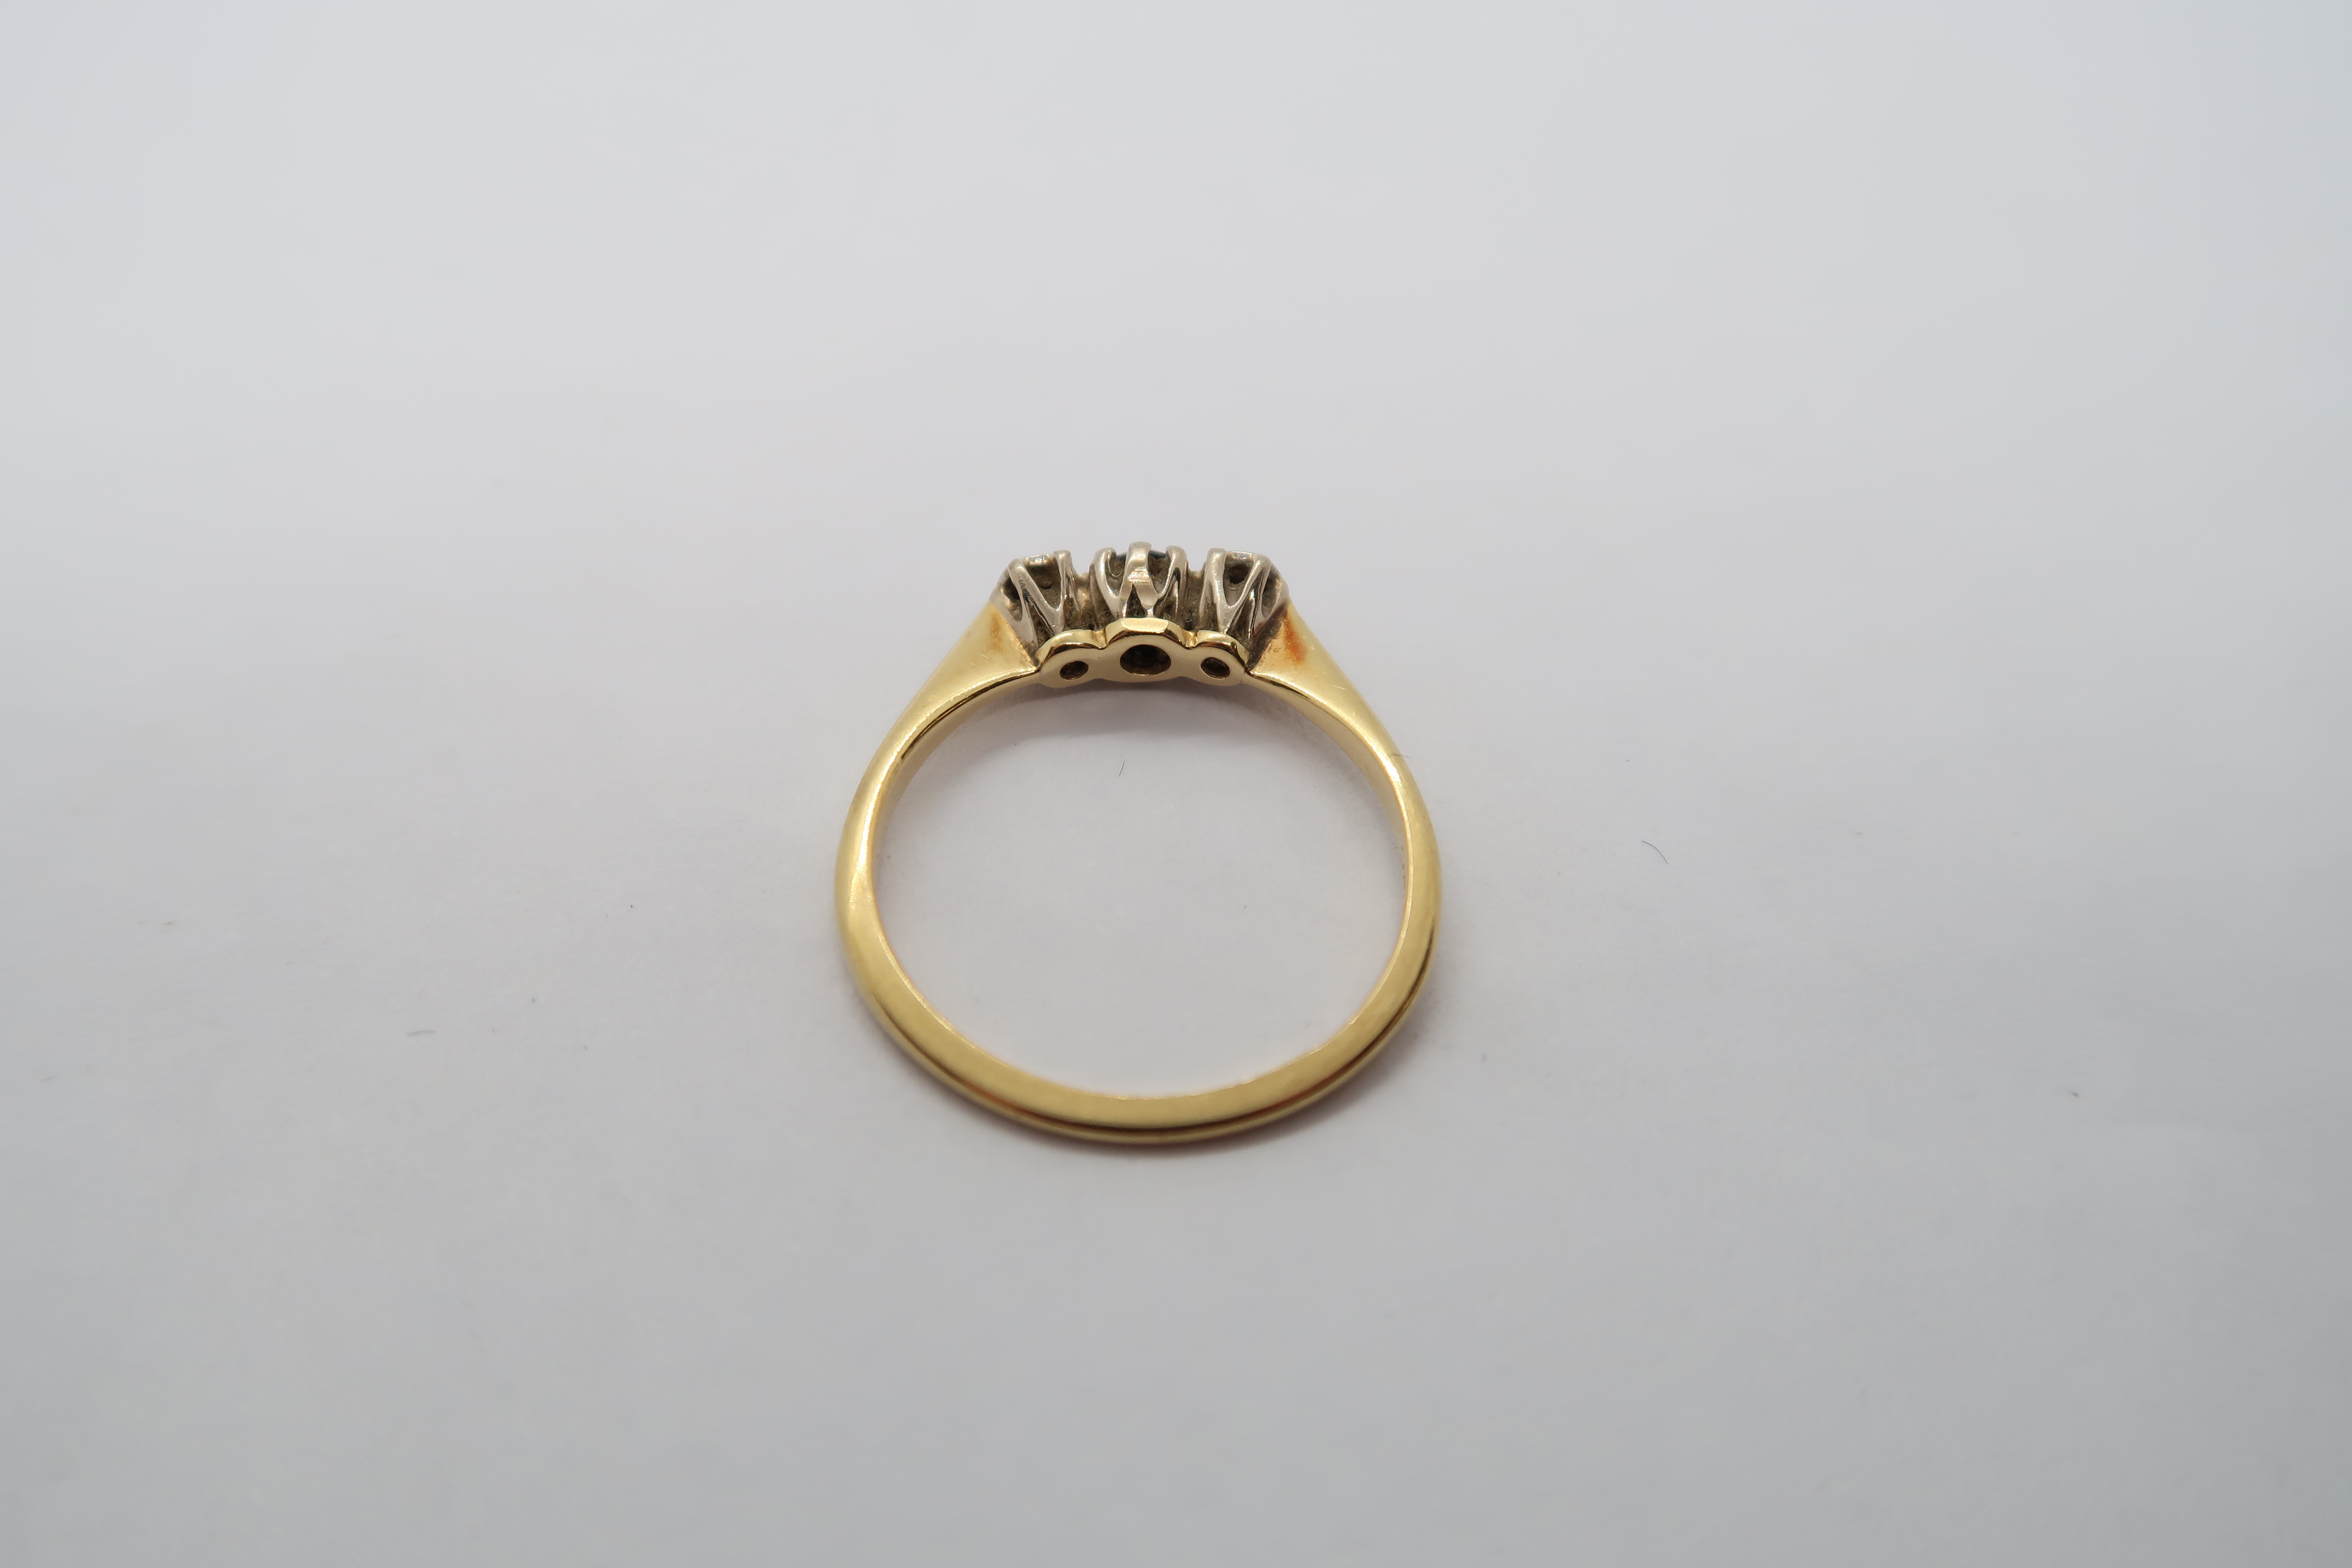 An 18ct hallmarked yellow gold three stone ring with diamonds and garnet, size L, approx 2 grams - Image 3 of 3